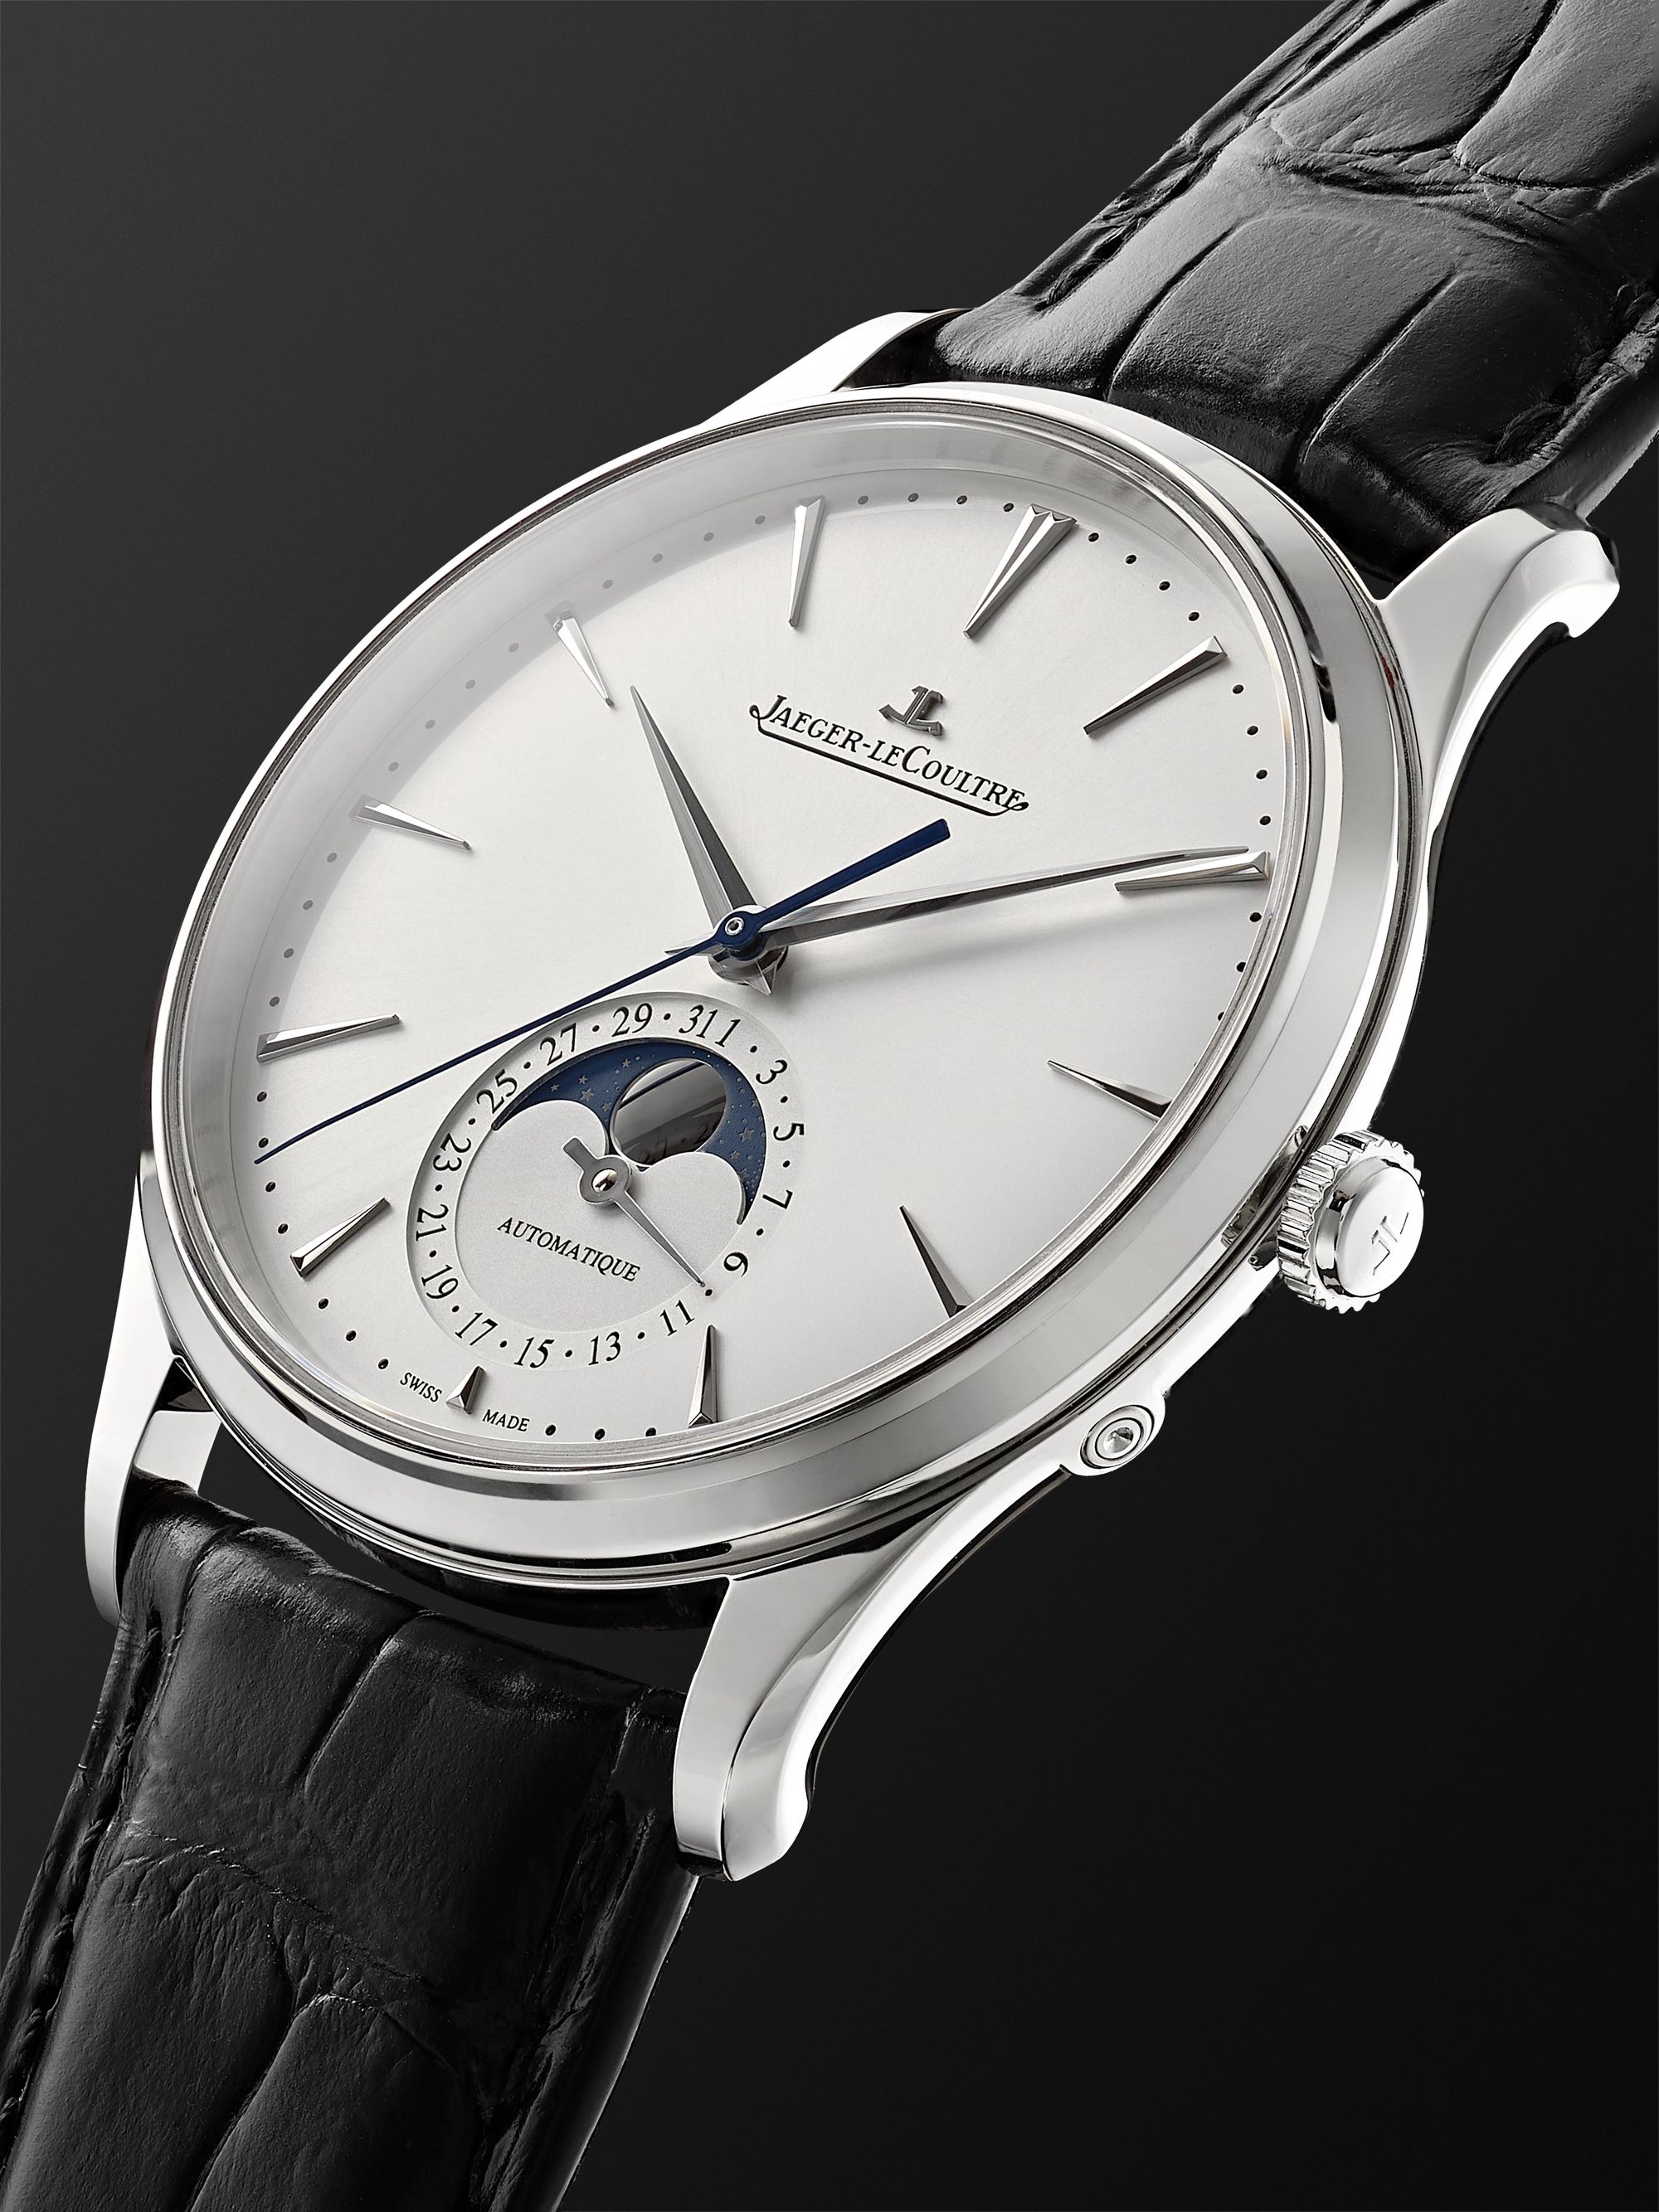 JAEGER-LECOULTRE Master Ultra Thin Automatic Moon-Phase 39mm Stainless Steel and Alligator Watch, Ref. No. 1368430